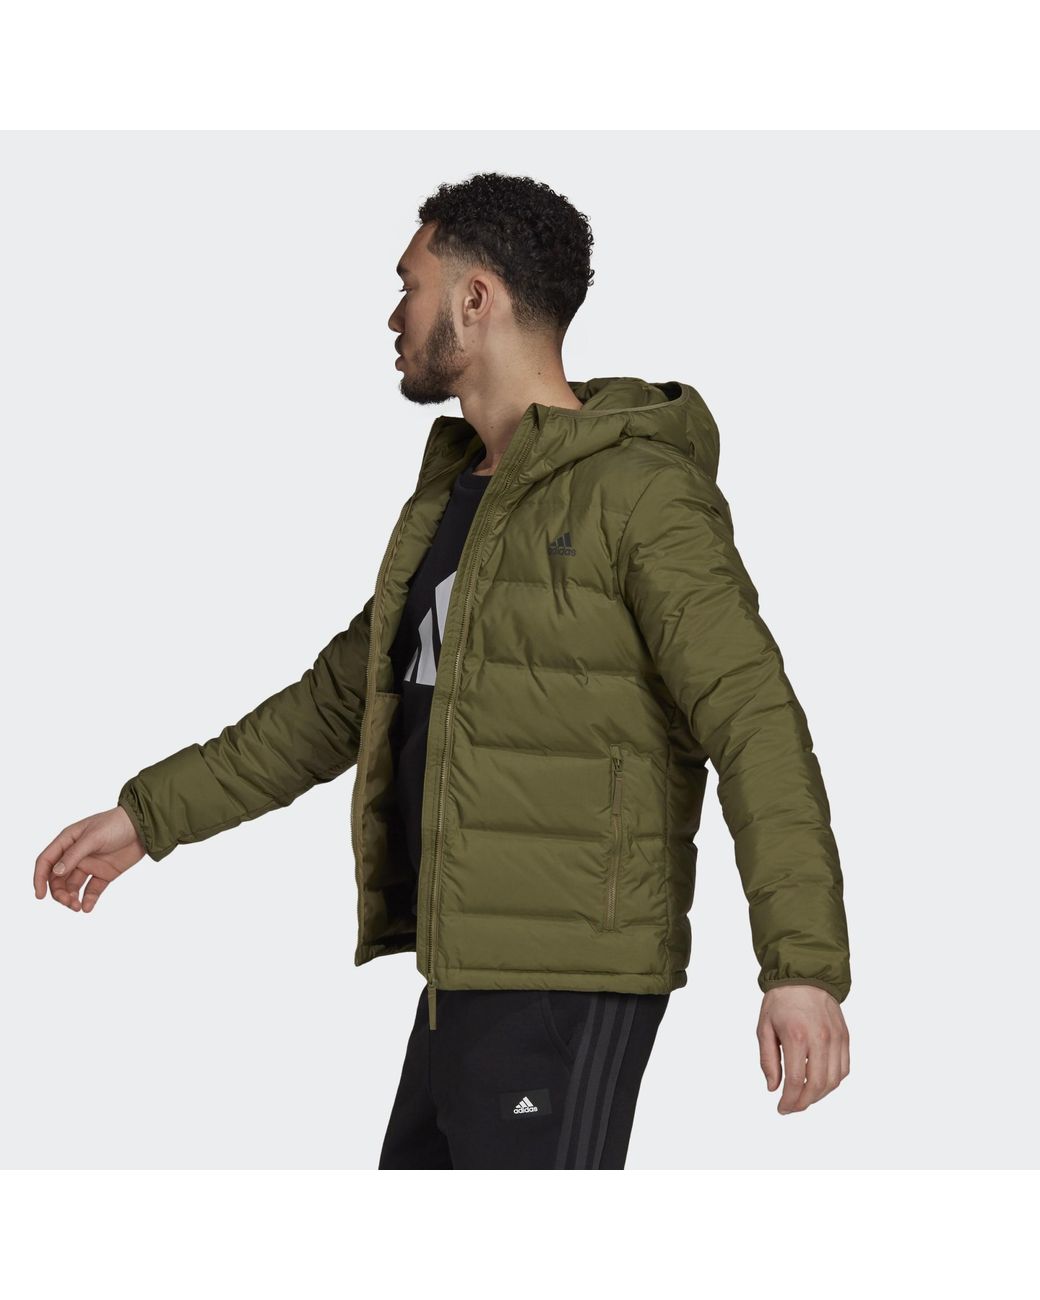 adidas Synthetic Helionic Hooded Down Jacket in Green for Men - Lyst